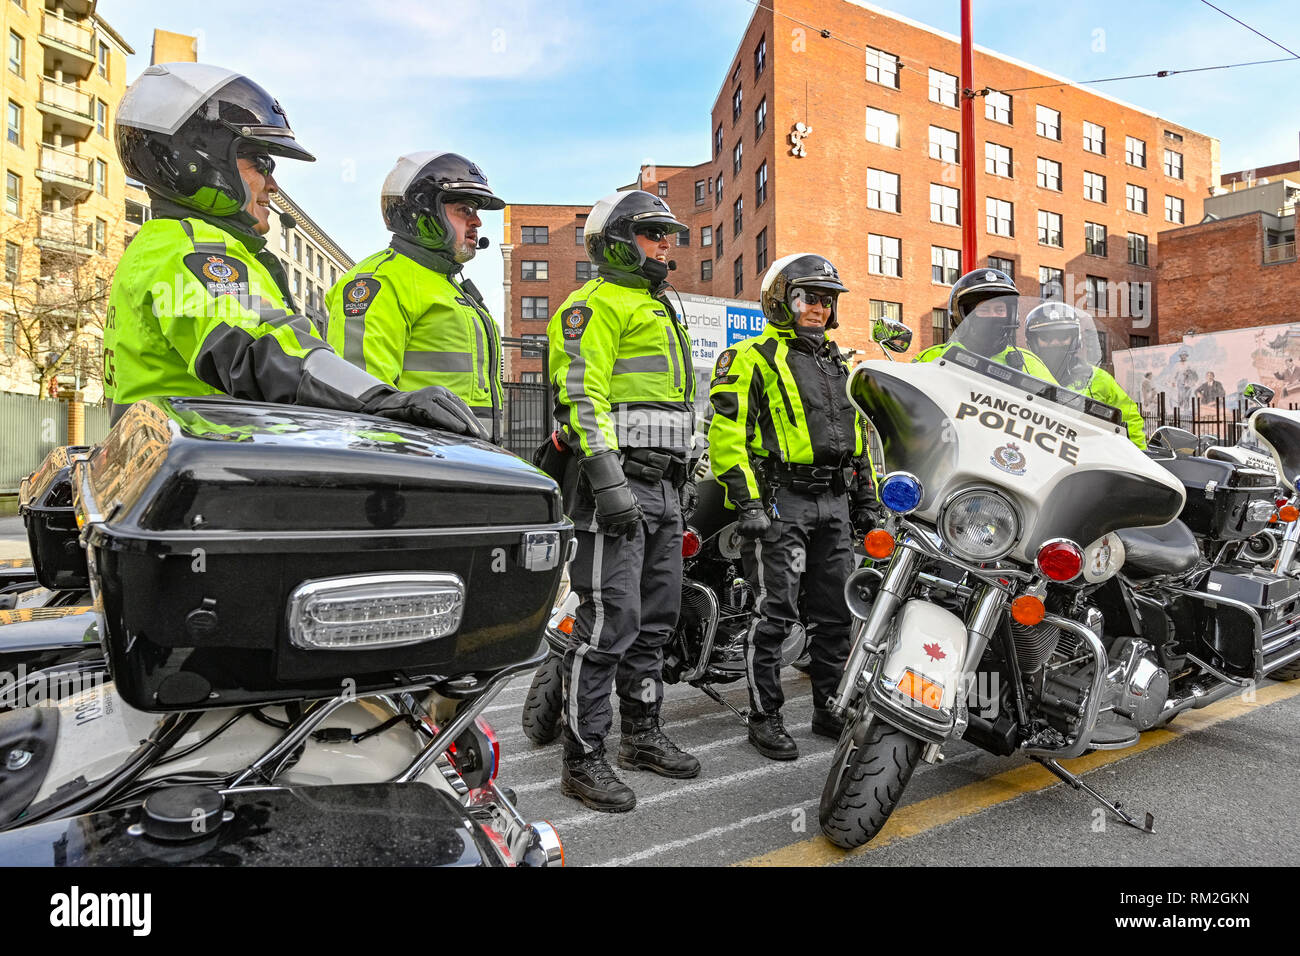 Vancouver Police Motorcycle squad, Vancouver, British Columbia, Canada Stock Photo